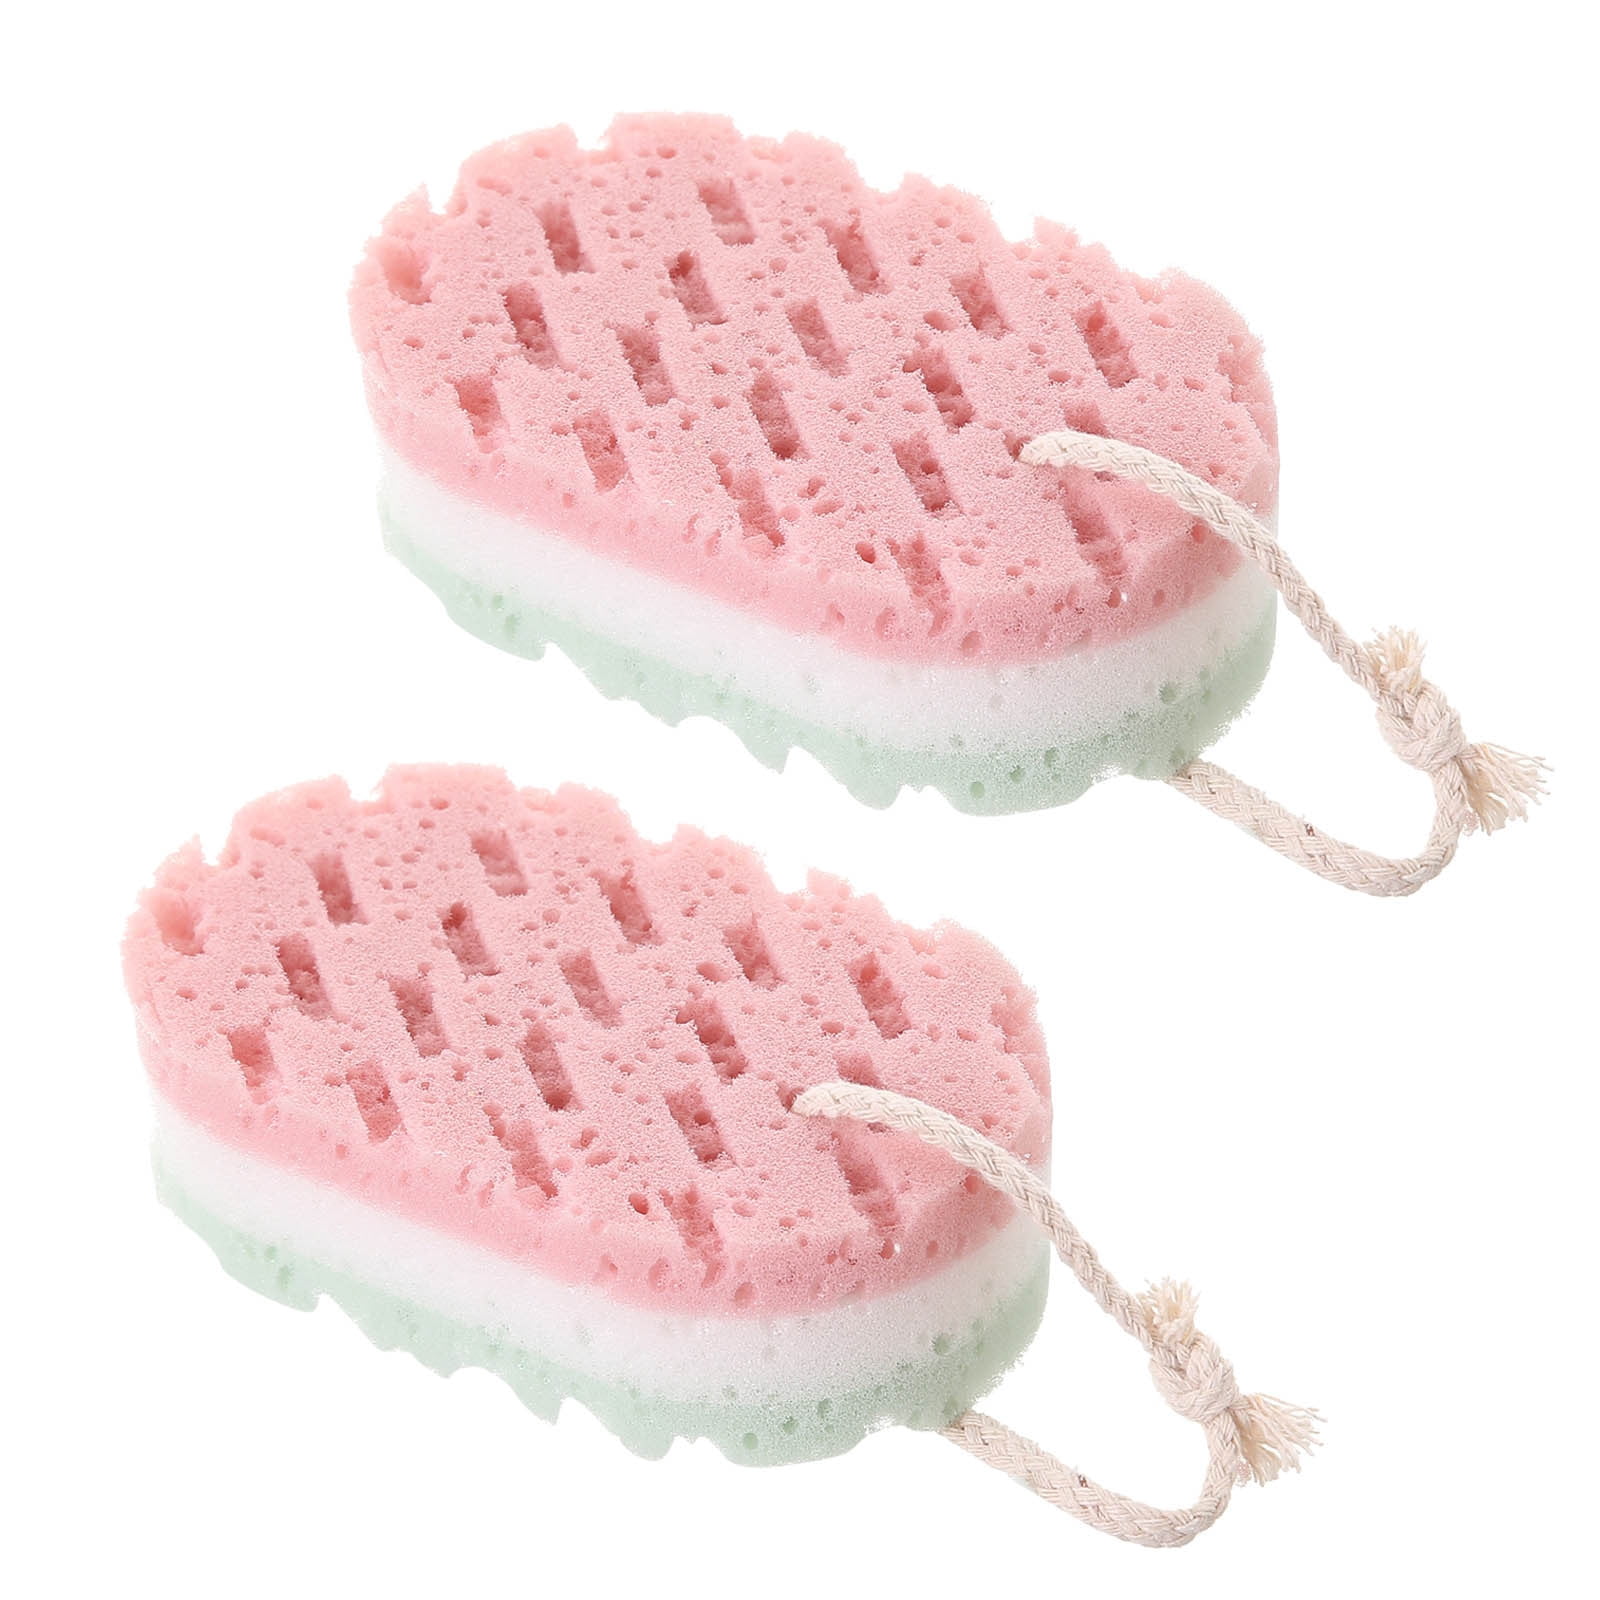  2 Pieces African Net Sponge Exfoliating Net African Body  Scrubber Bath Rag Washcloth Towel Shower Body Back Scrubber Skin Smoother  for Daily Use or Stocking Stuffer (Peach Pink, Creamy)